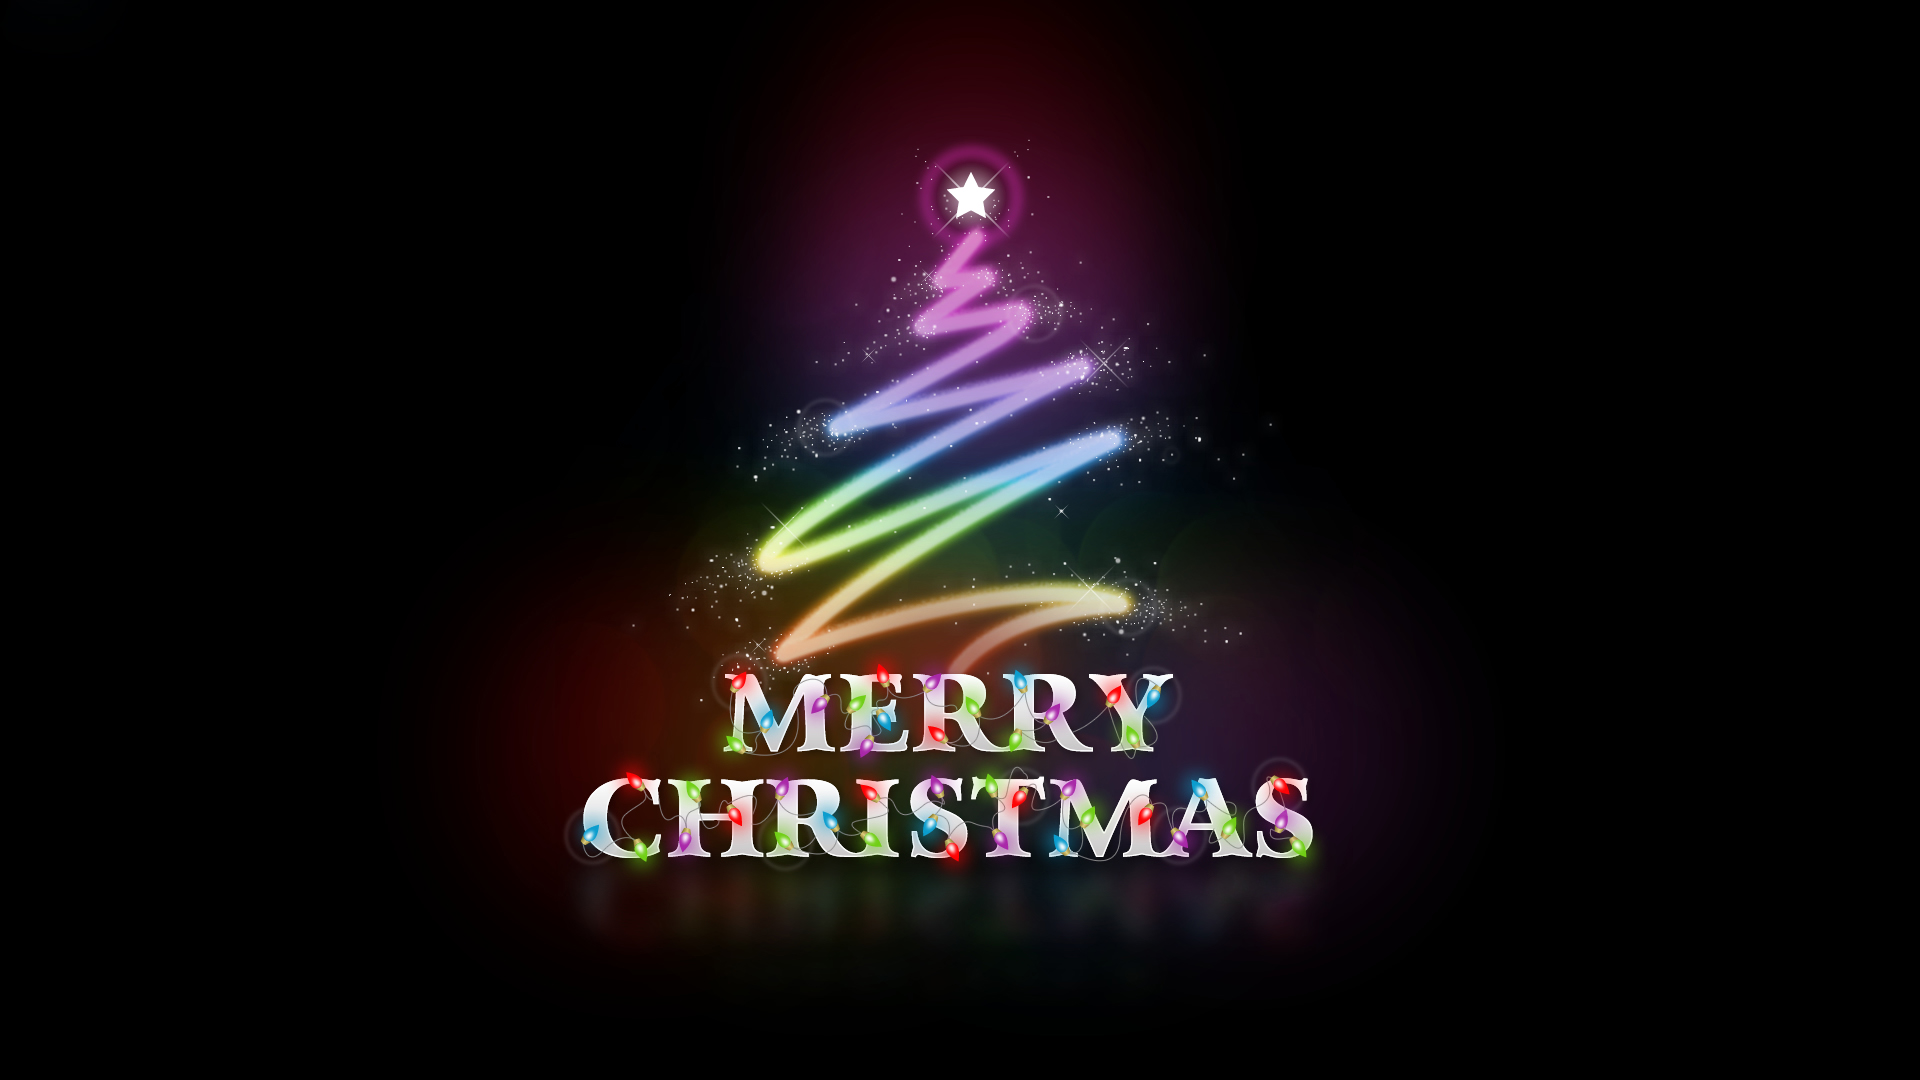 Merry Christmas Wallpaper HD Pictures One